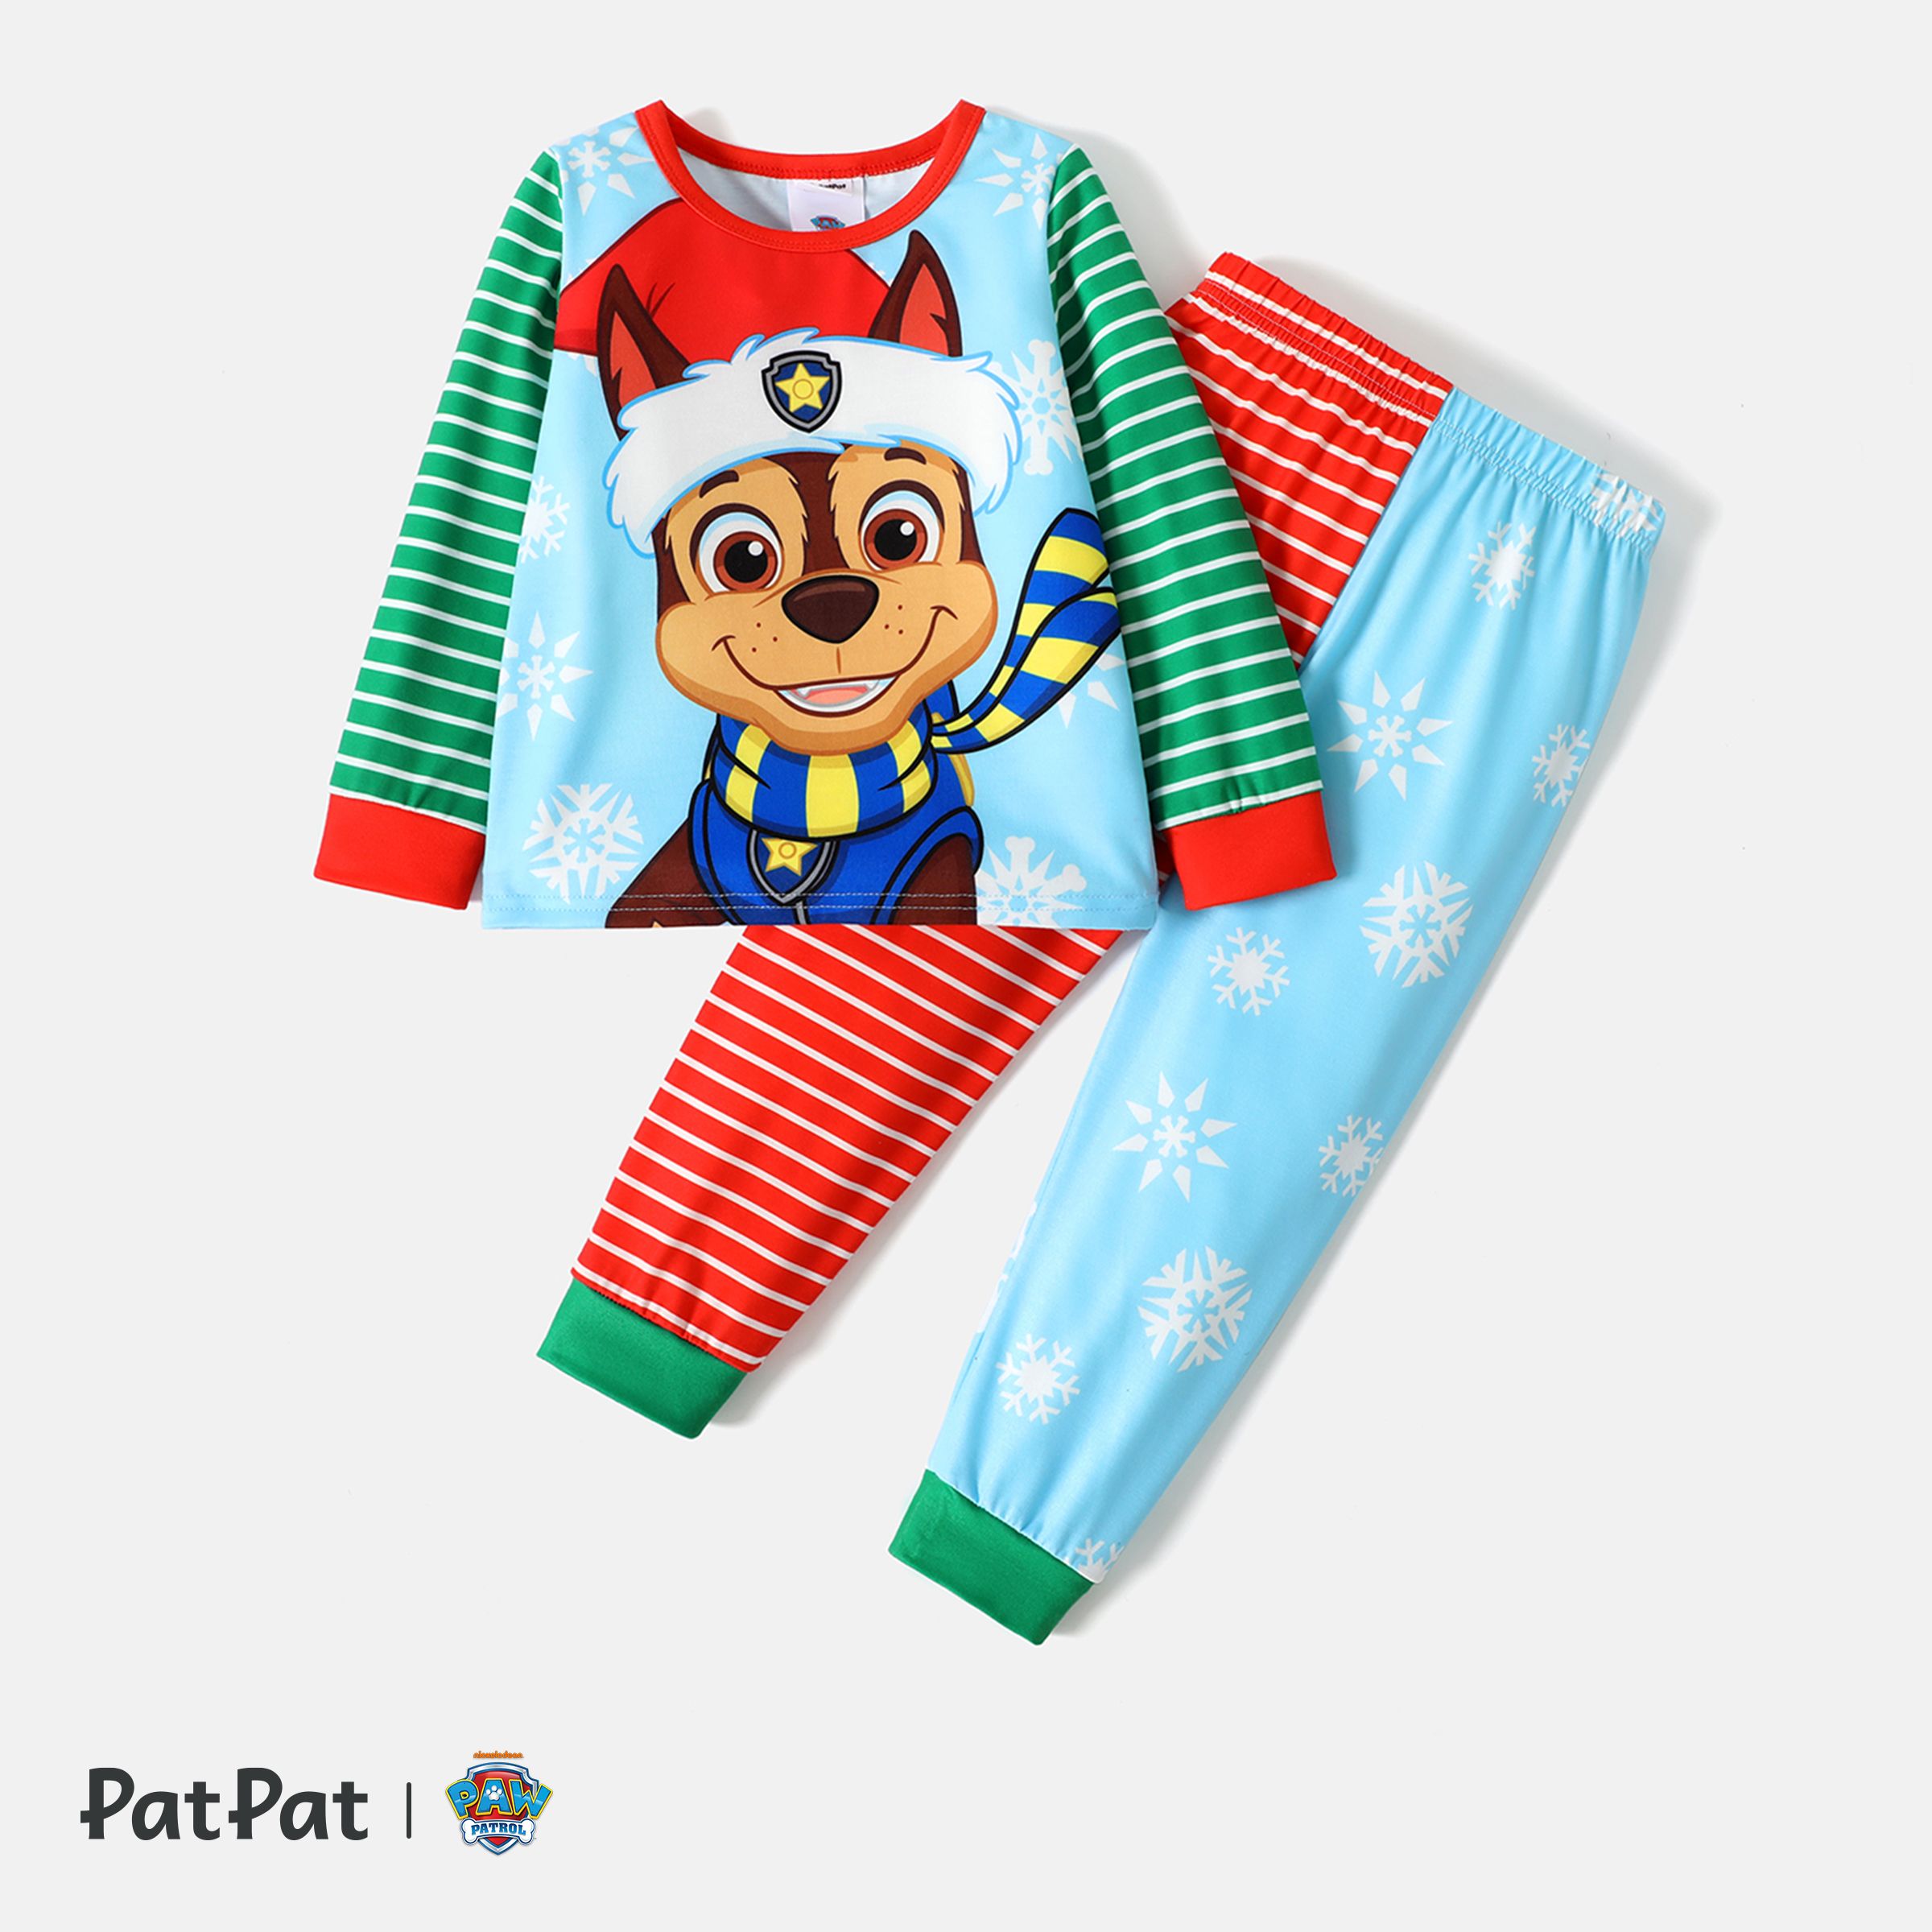 Buy Character Shop PAW Patrol Clothes Online for Sale - PatPat US